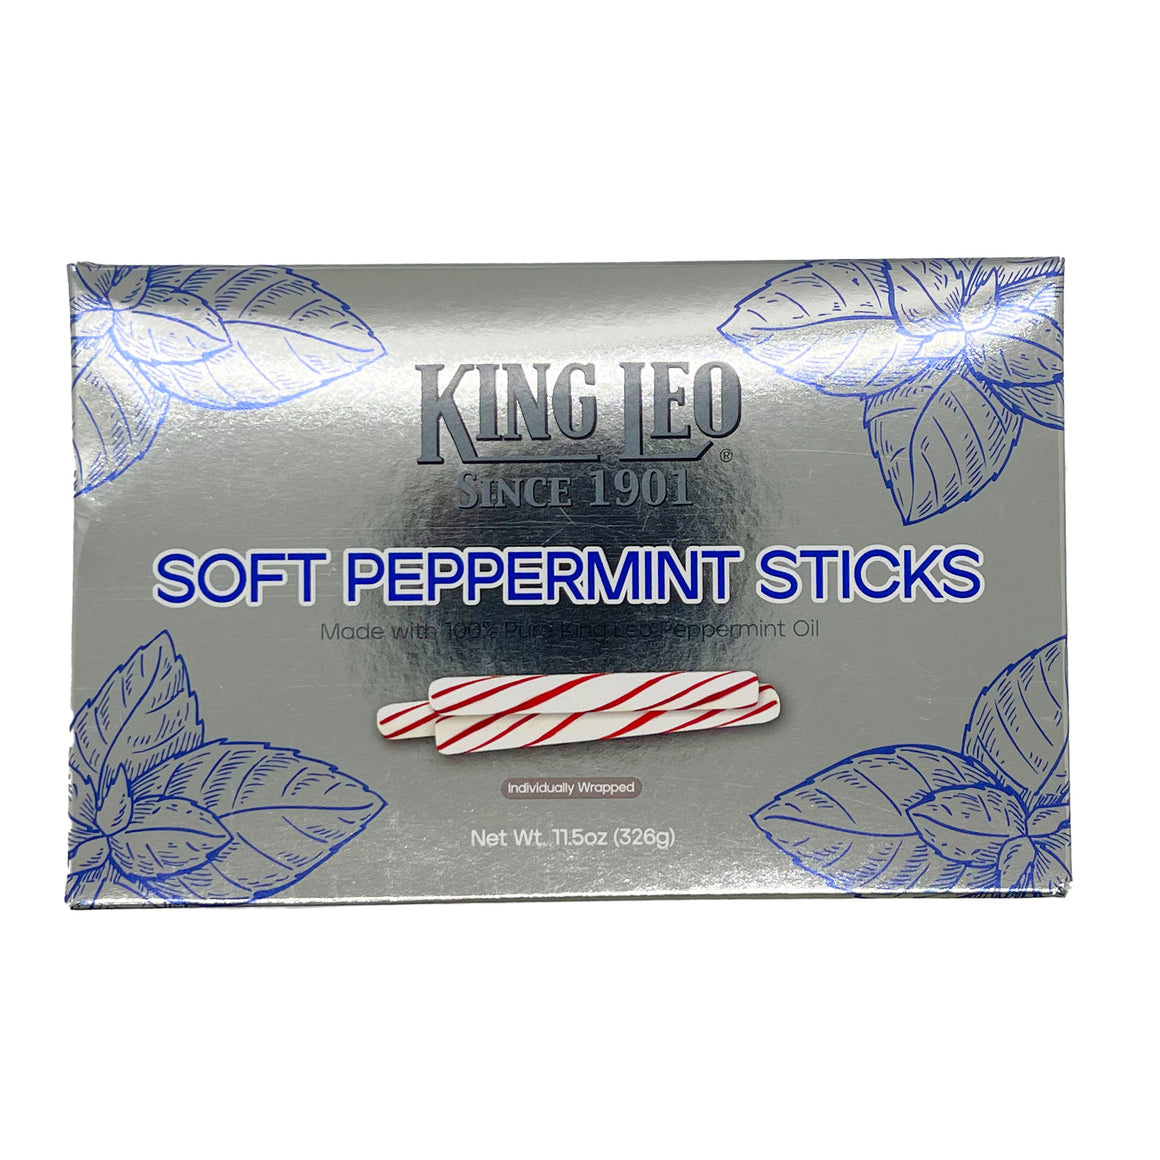 All City Candy King Leo Soft Peppermint Sticks Individually Wrapped 11.5 oz. Box Christmas Quality Candy Company For fresh candy and great service, visit www.allcitycandy.com